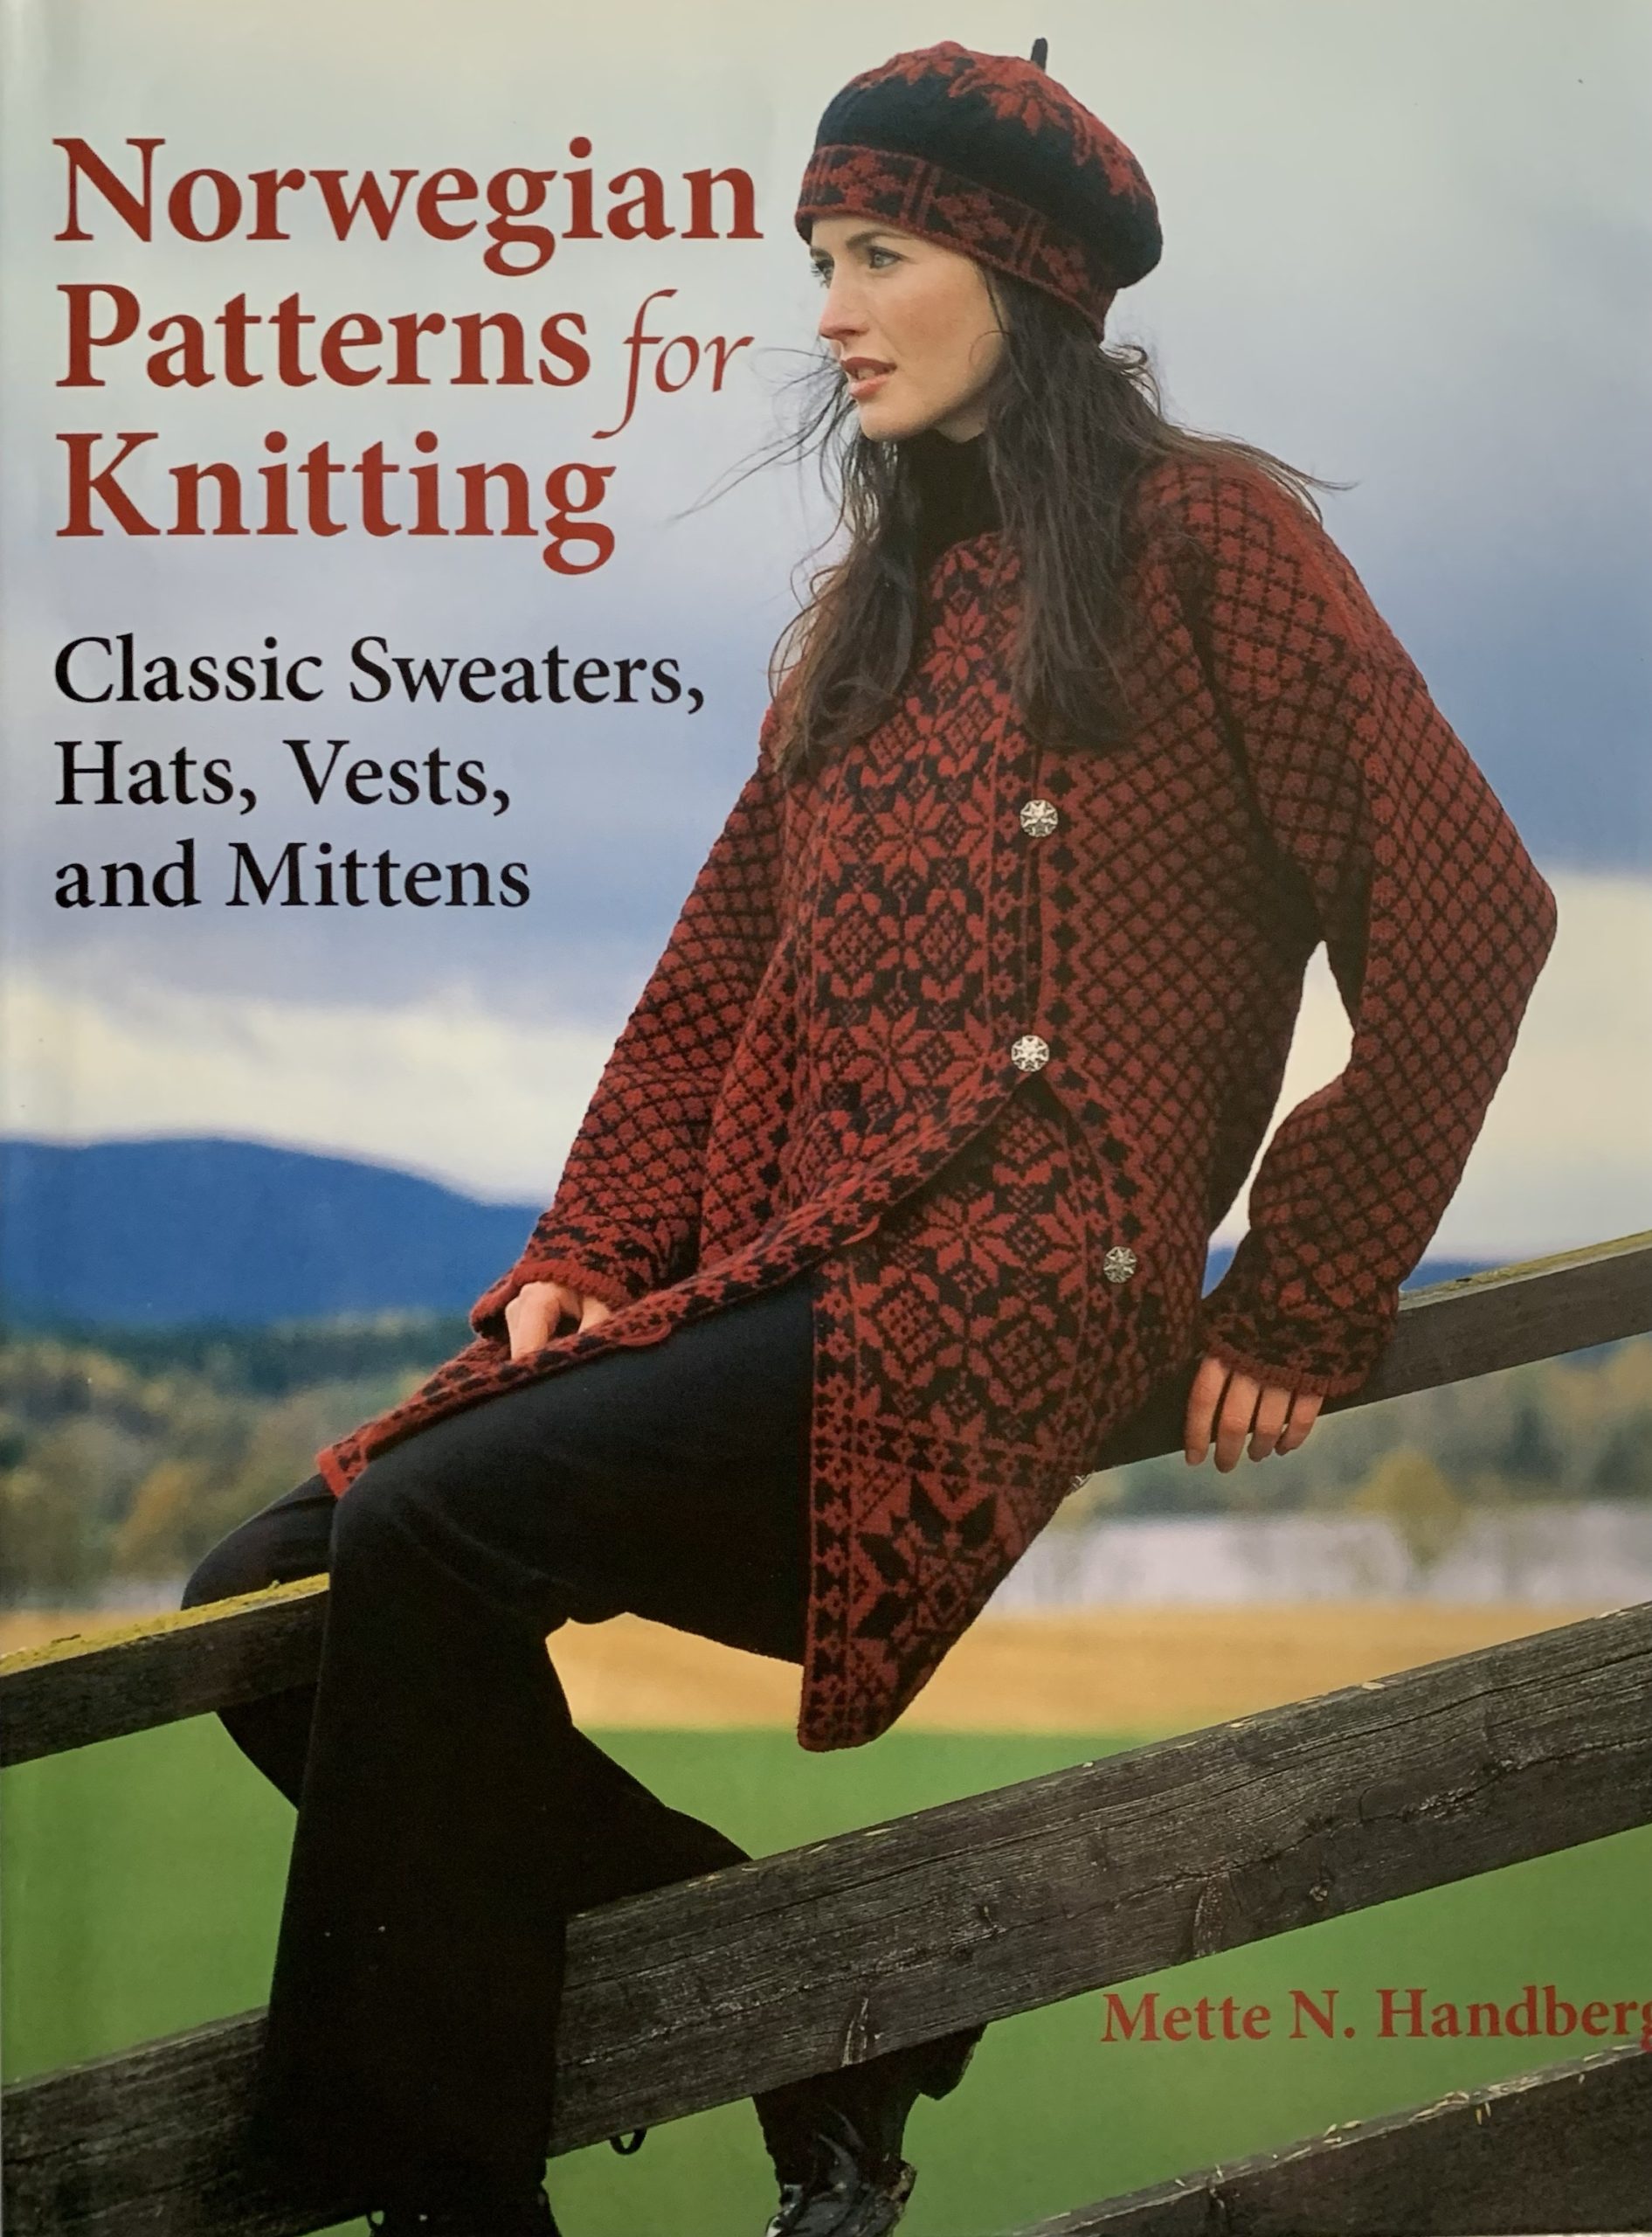 Norwegian Patterns for Knitting: Classic Sweaters, Hats, Vests, and Mittens by Mette N Handberg